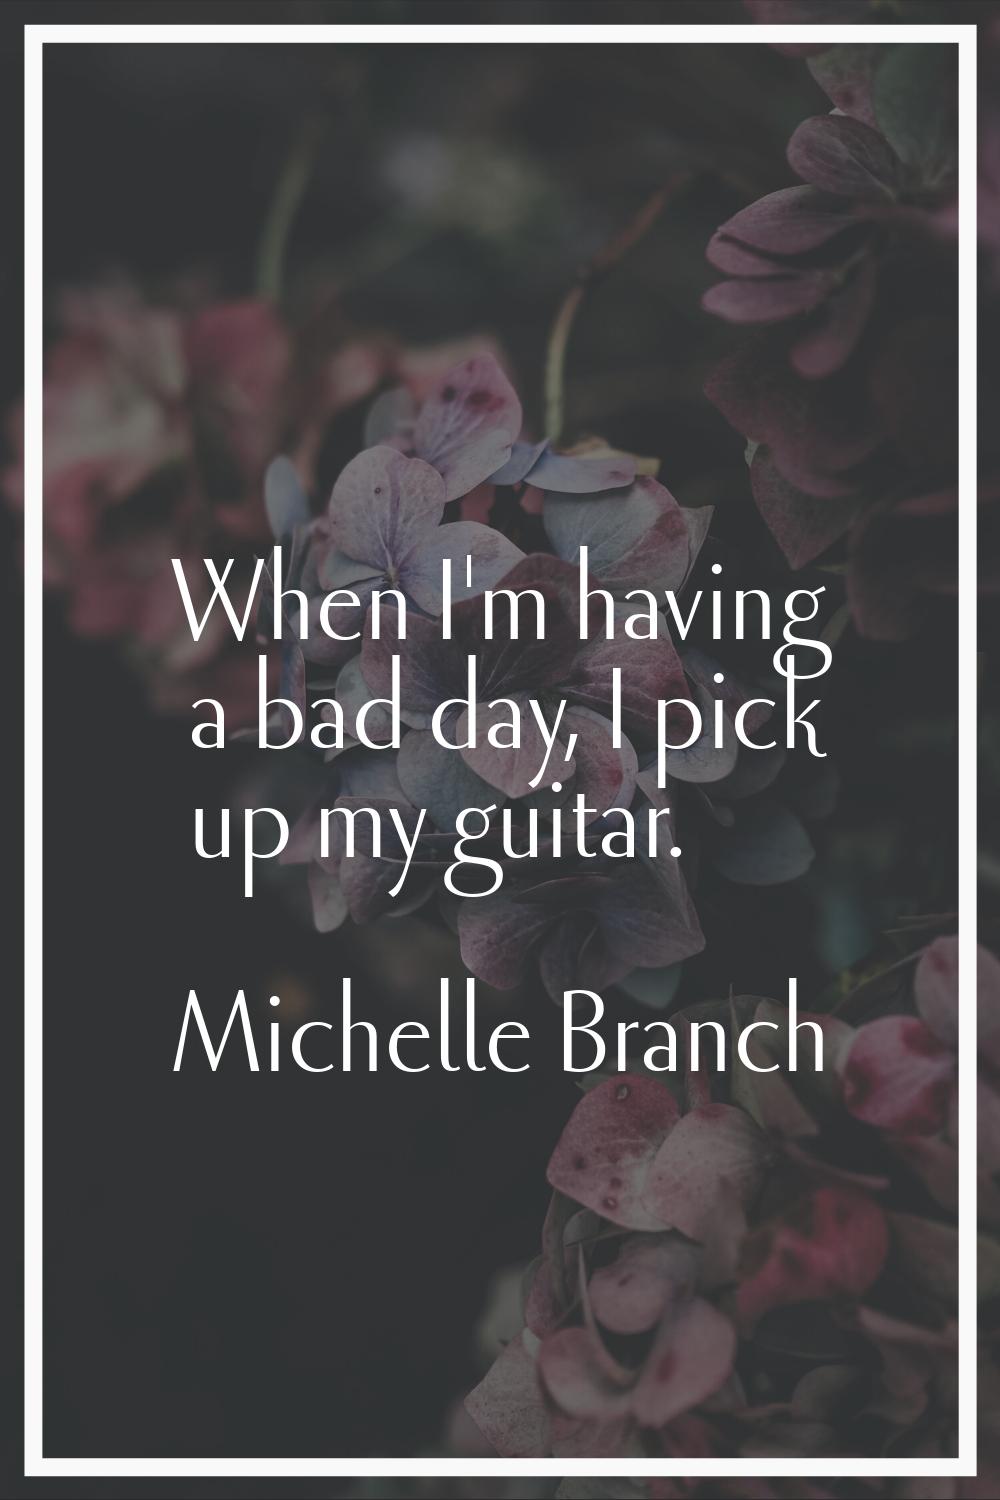 When I'm having a bad day, I pick up my guitar.